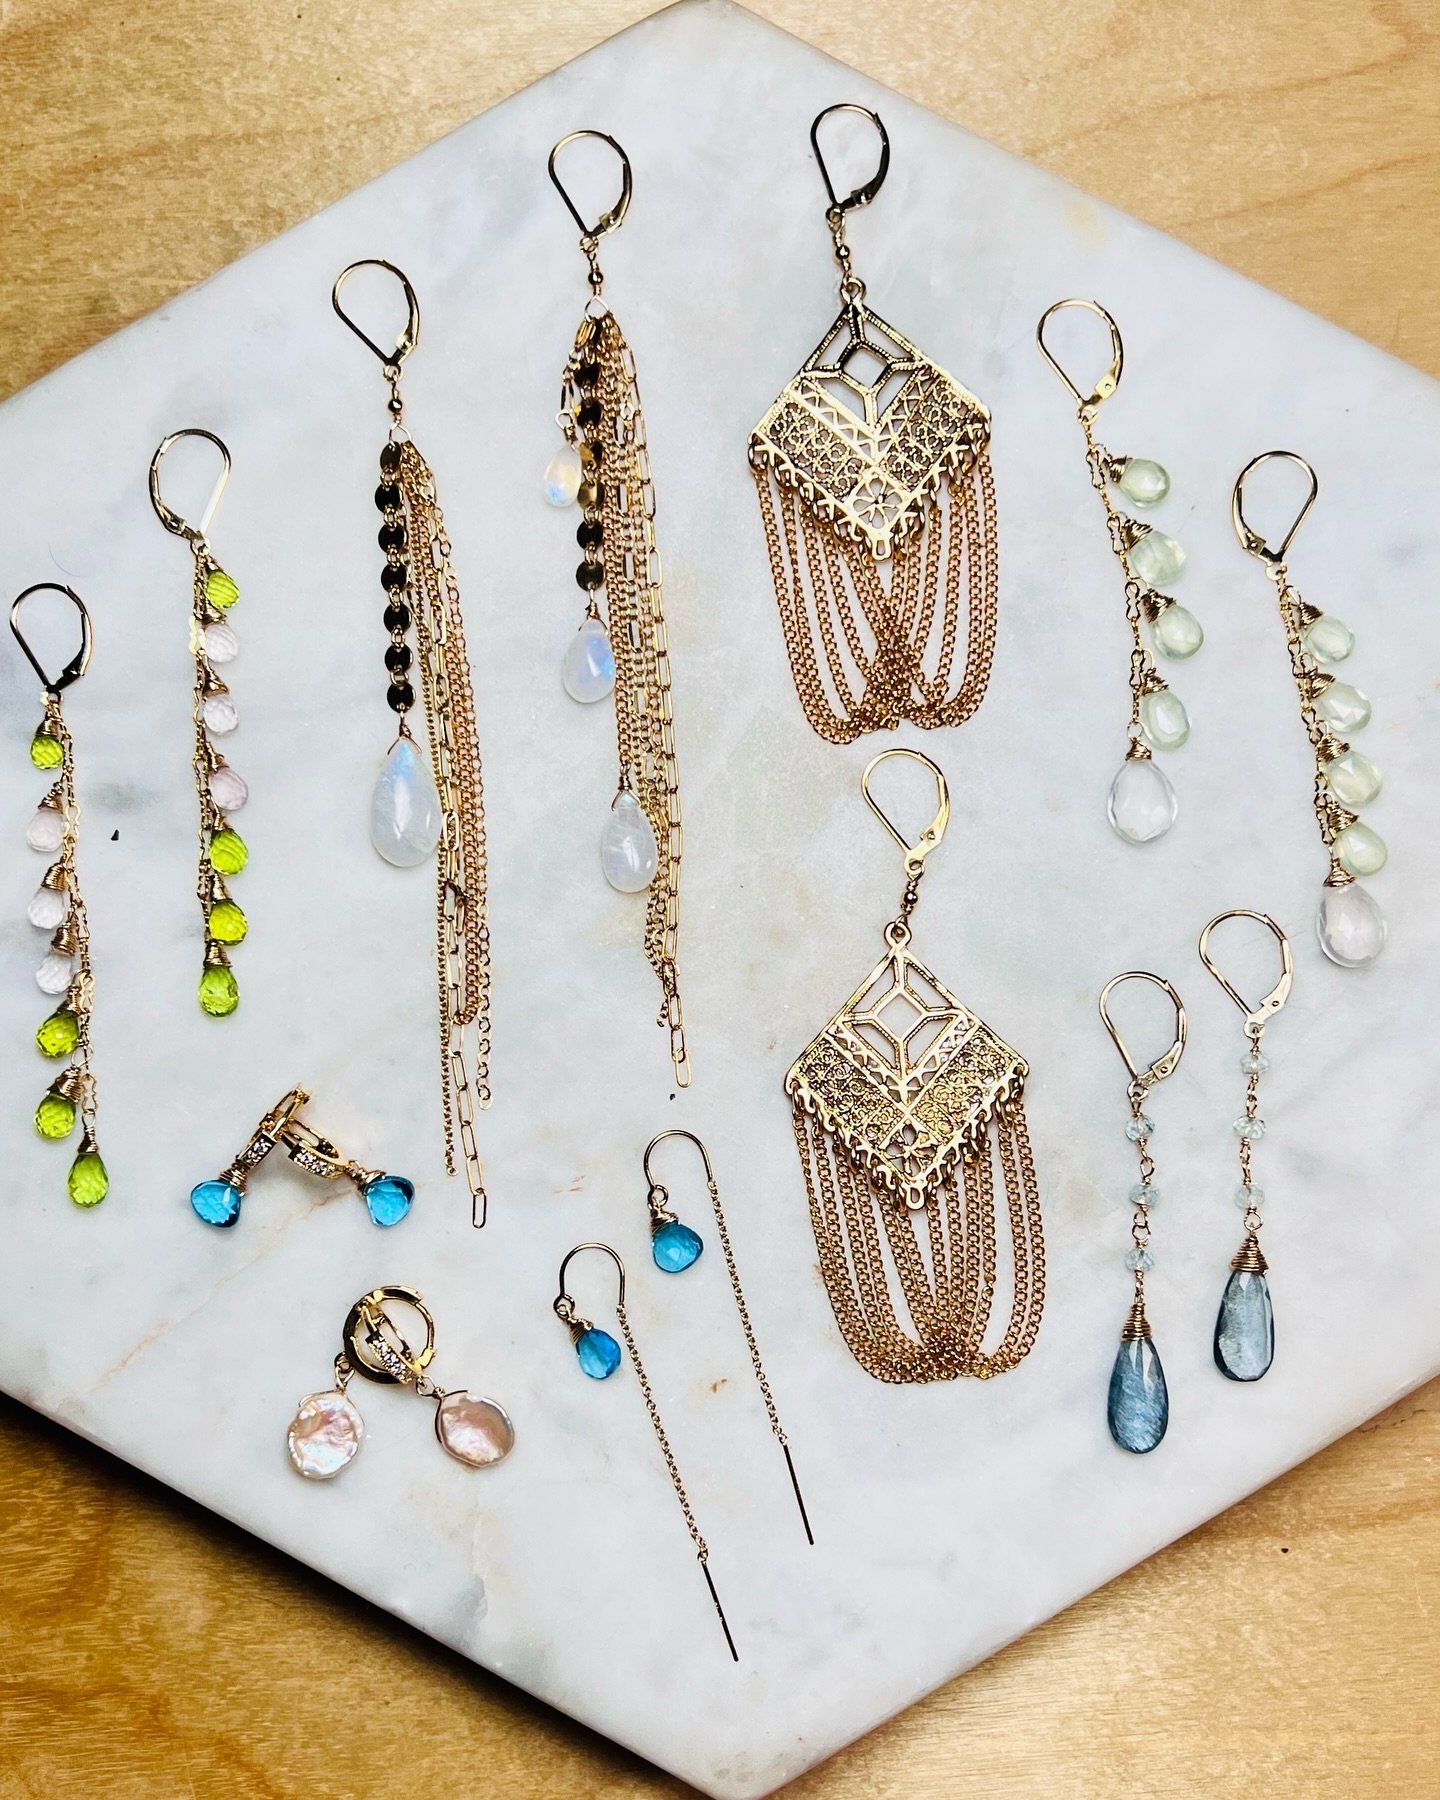 &ldquo;✨ Festival season is upon us! 🌸 Get ready to shine with Linka Jewelry&rsquo;s exquisite handmade earrings, designed to complement your vibrant spirit. Our safe findings ensure you can dance freely and enjoy every moment. Catch us at Coachella